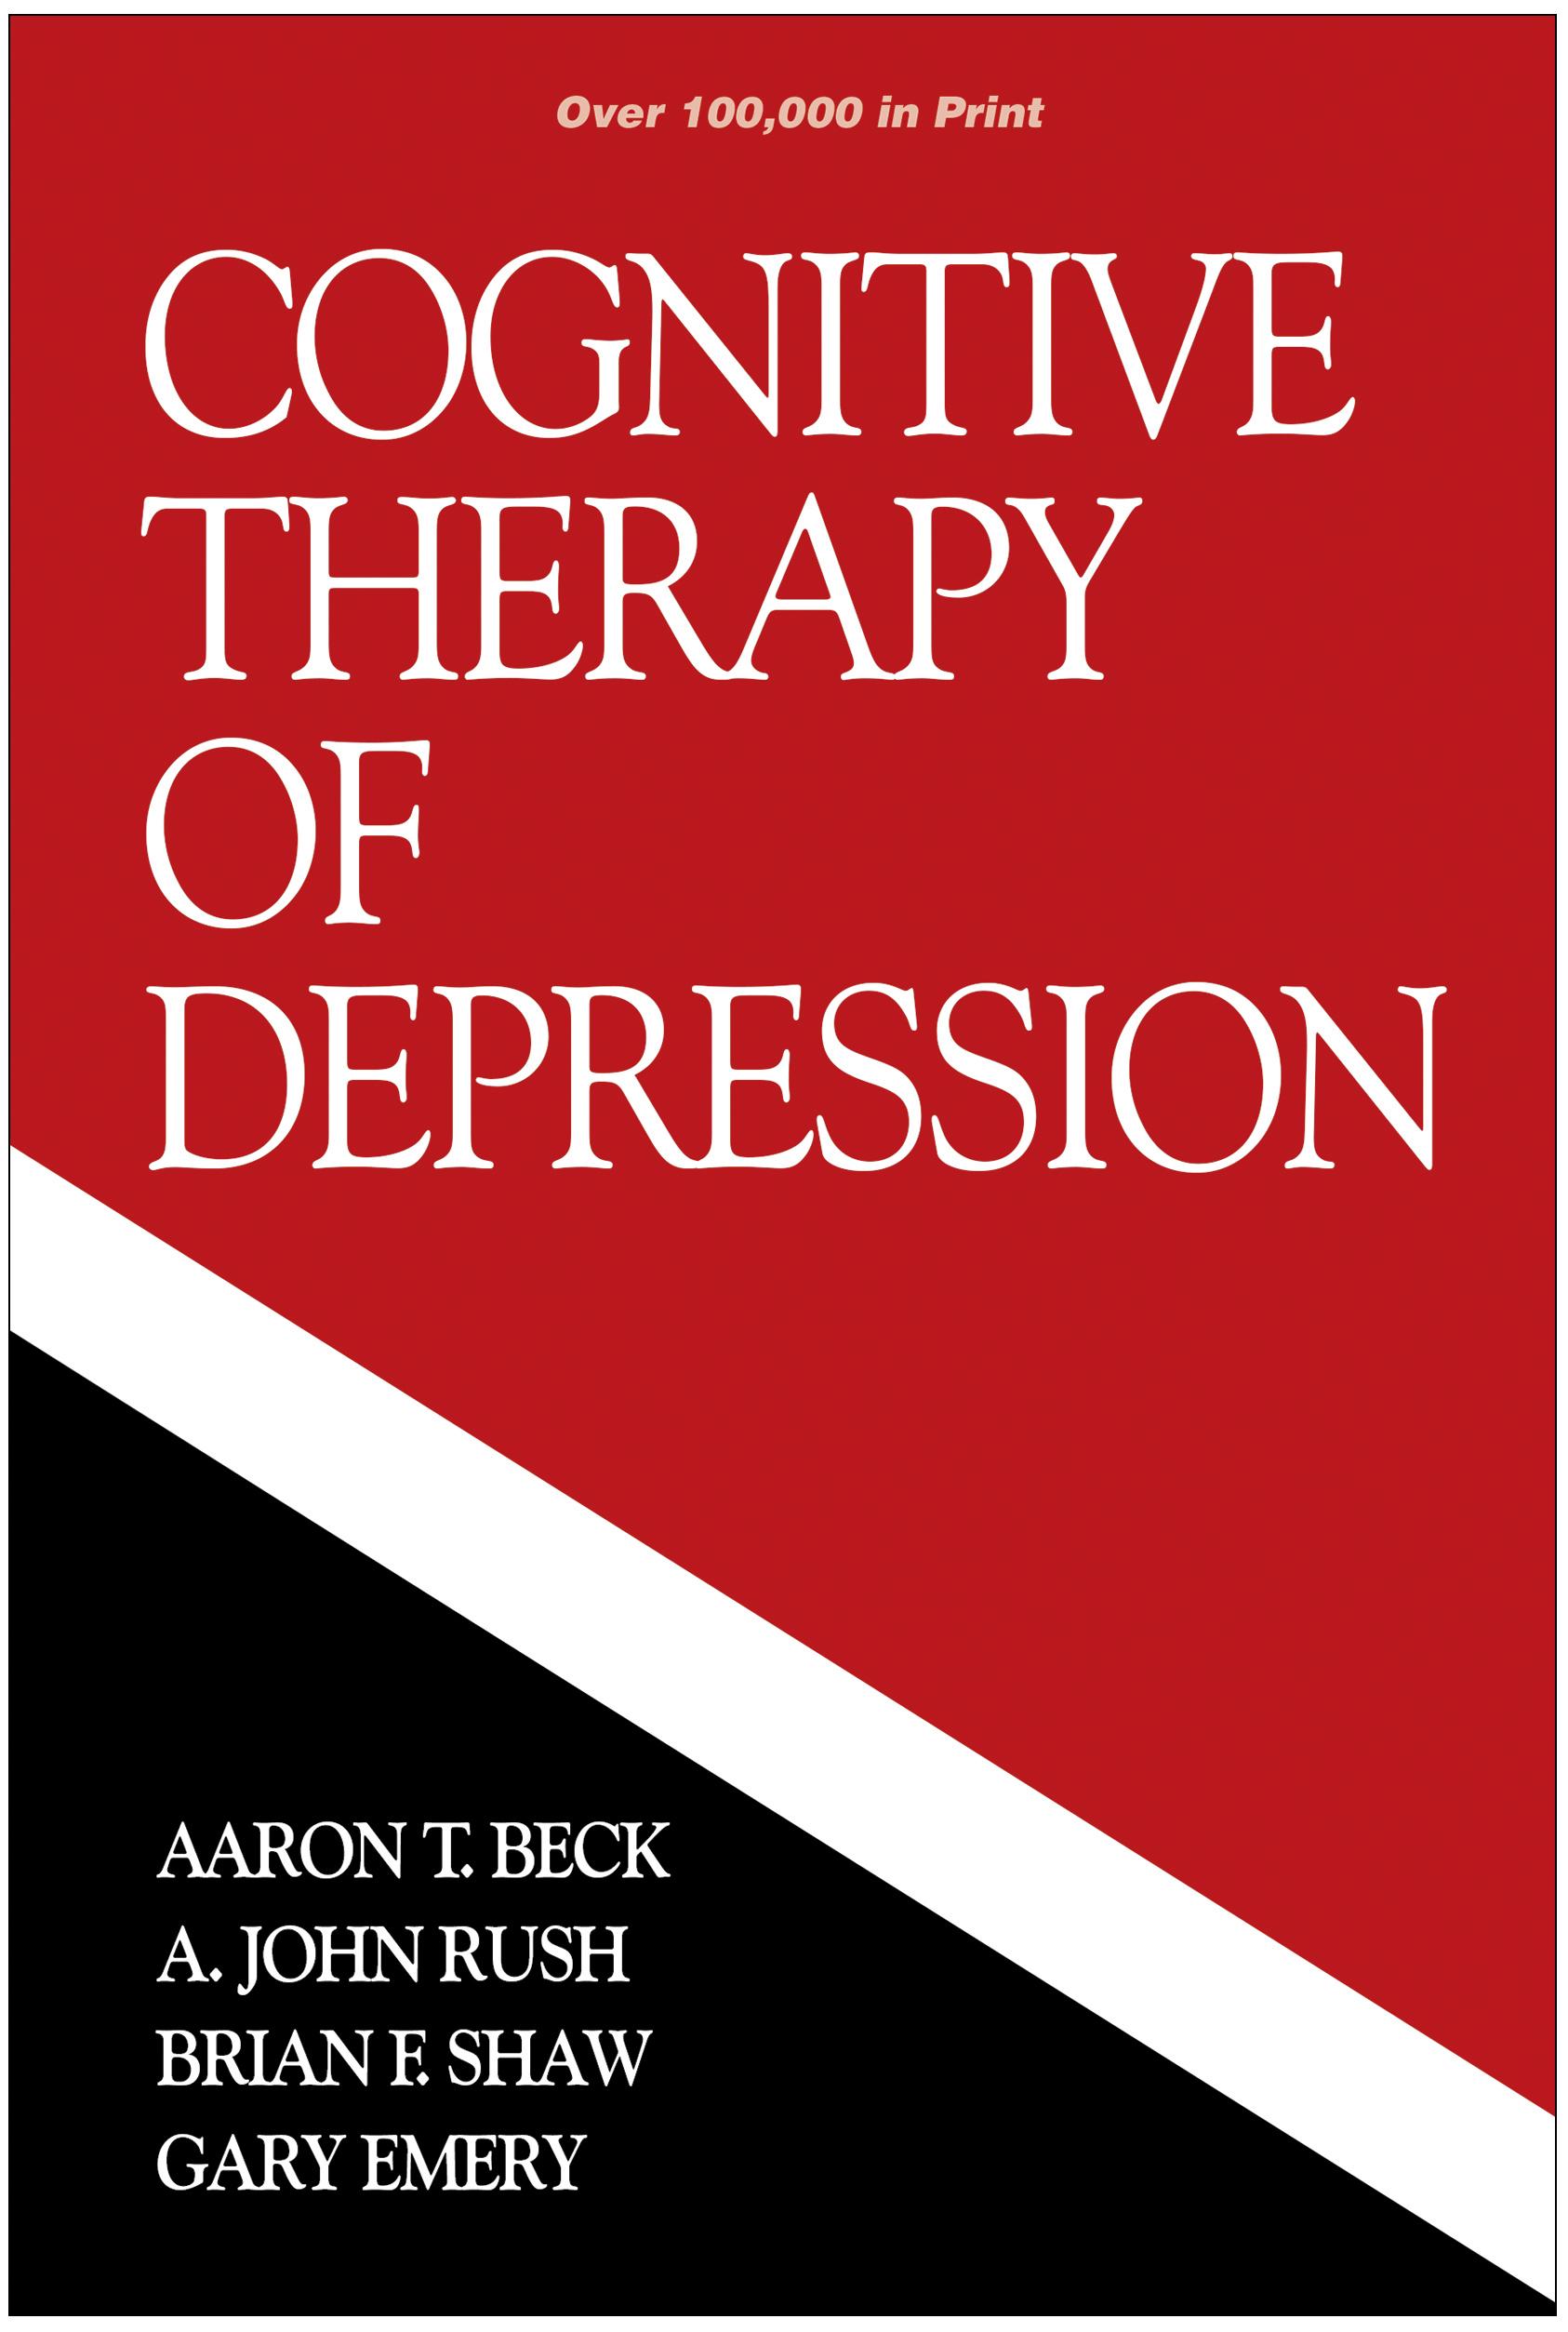 Cognitive Therapy of Depression / Aaron T Beck (u. a.) / Taschenbuch / Einband - flex.(Paperback) / Englisch / 1987 / Guilford Publications / EAN 9780898629194 - Beck, Aaron T